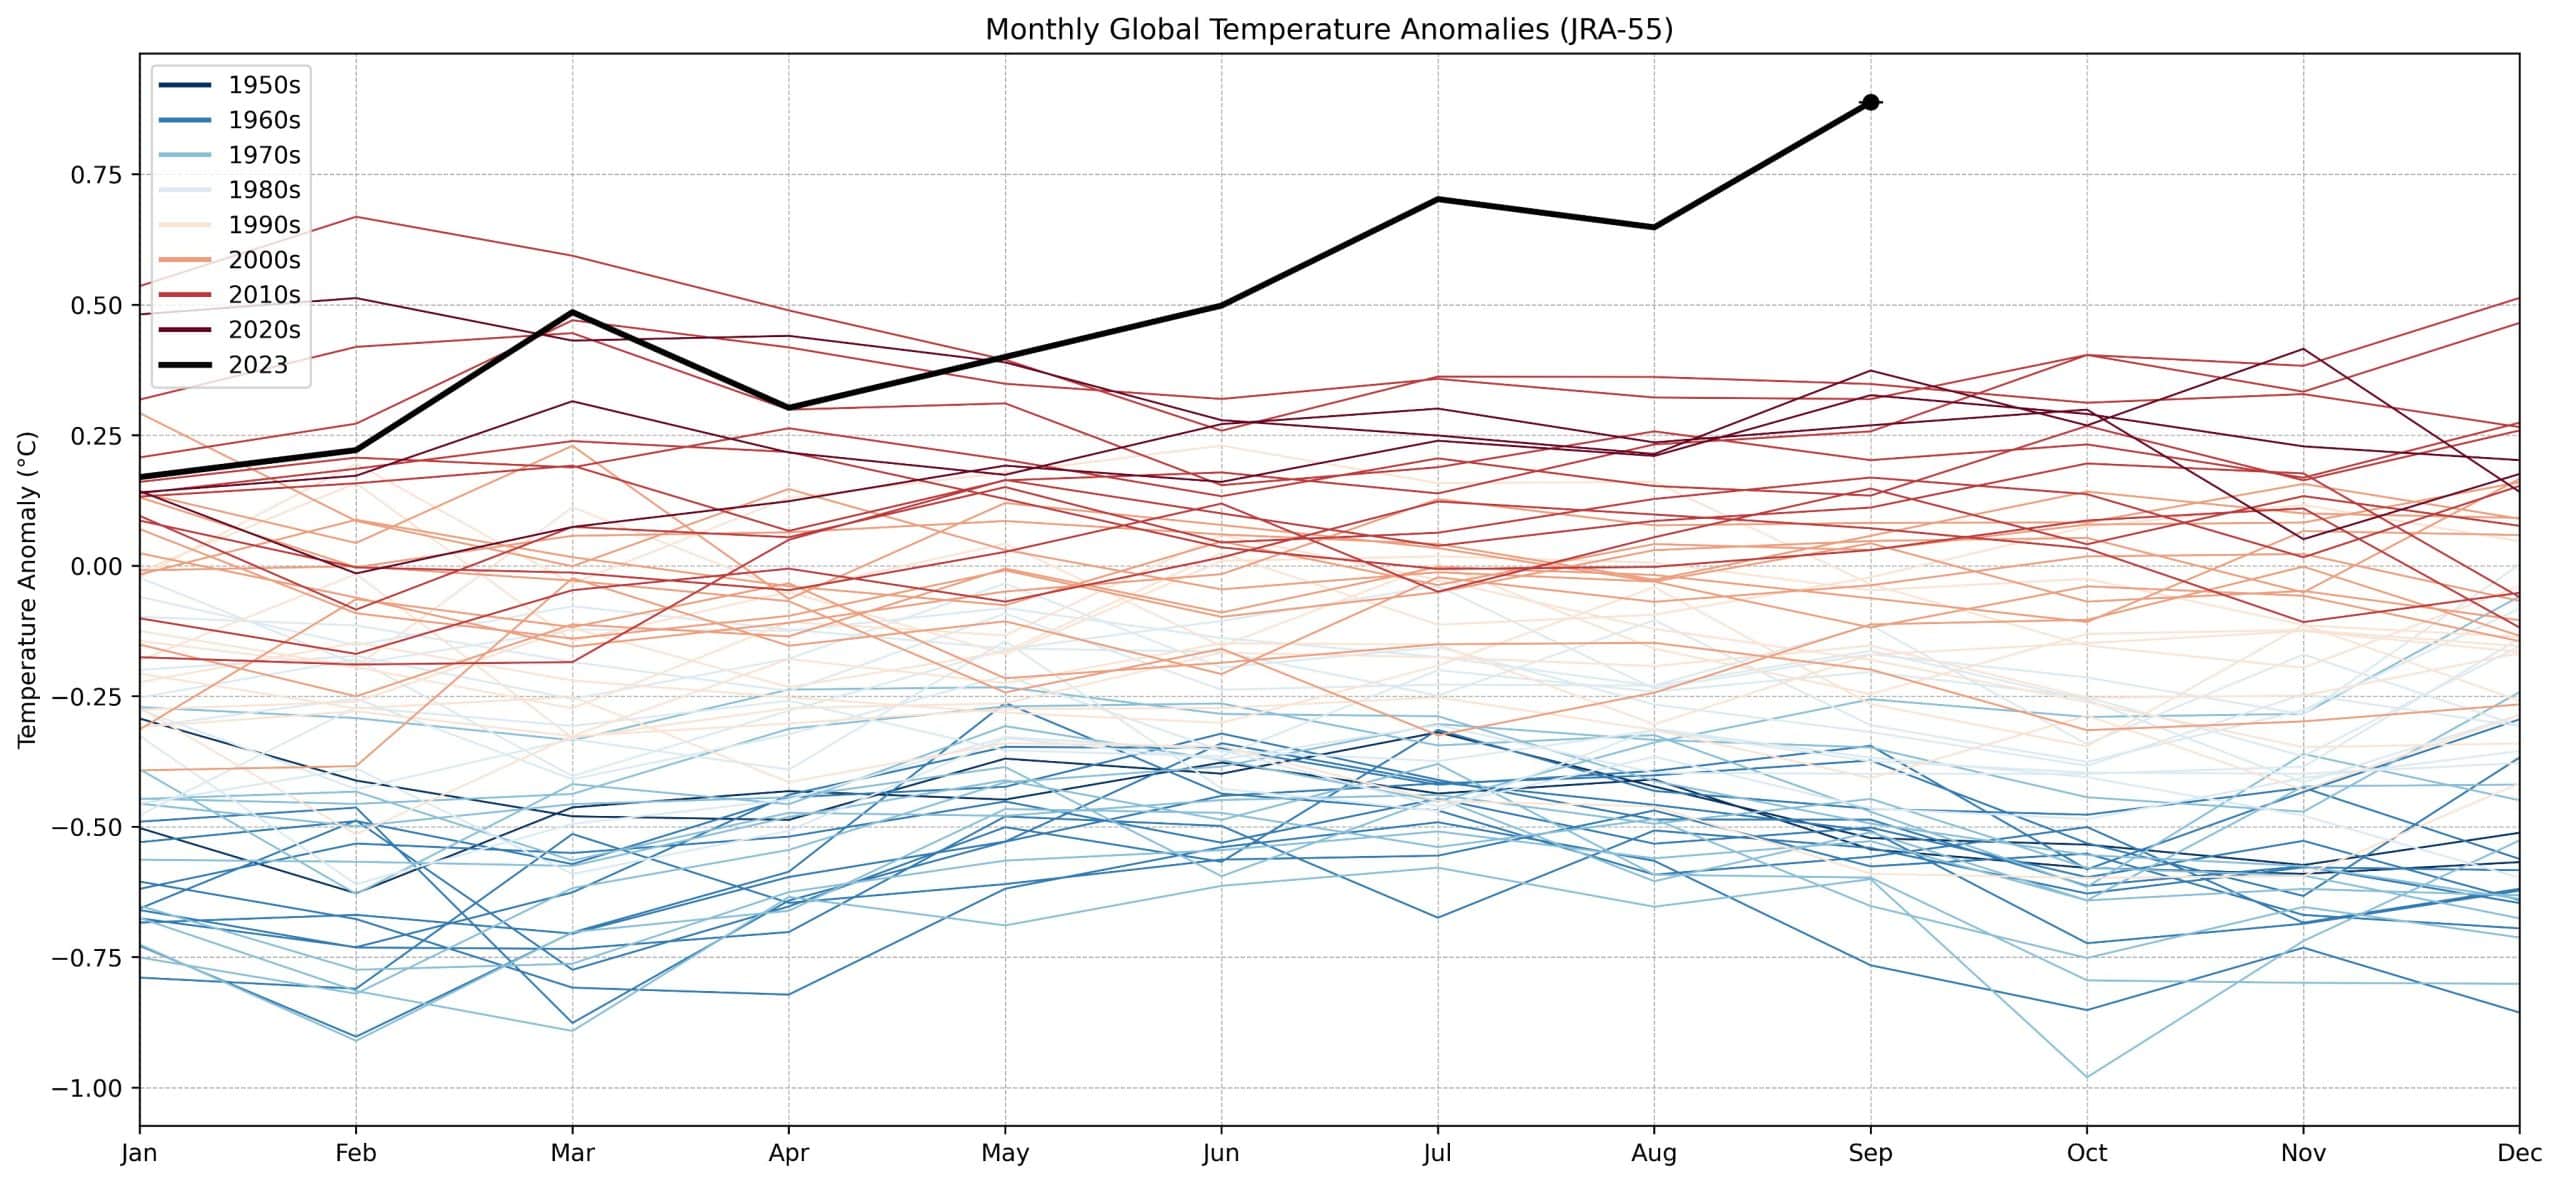 September was the most anomalously warm month on record. Image: Zeke Hausfather/X.